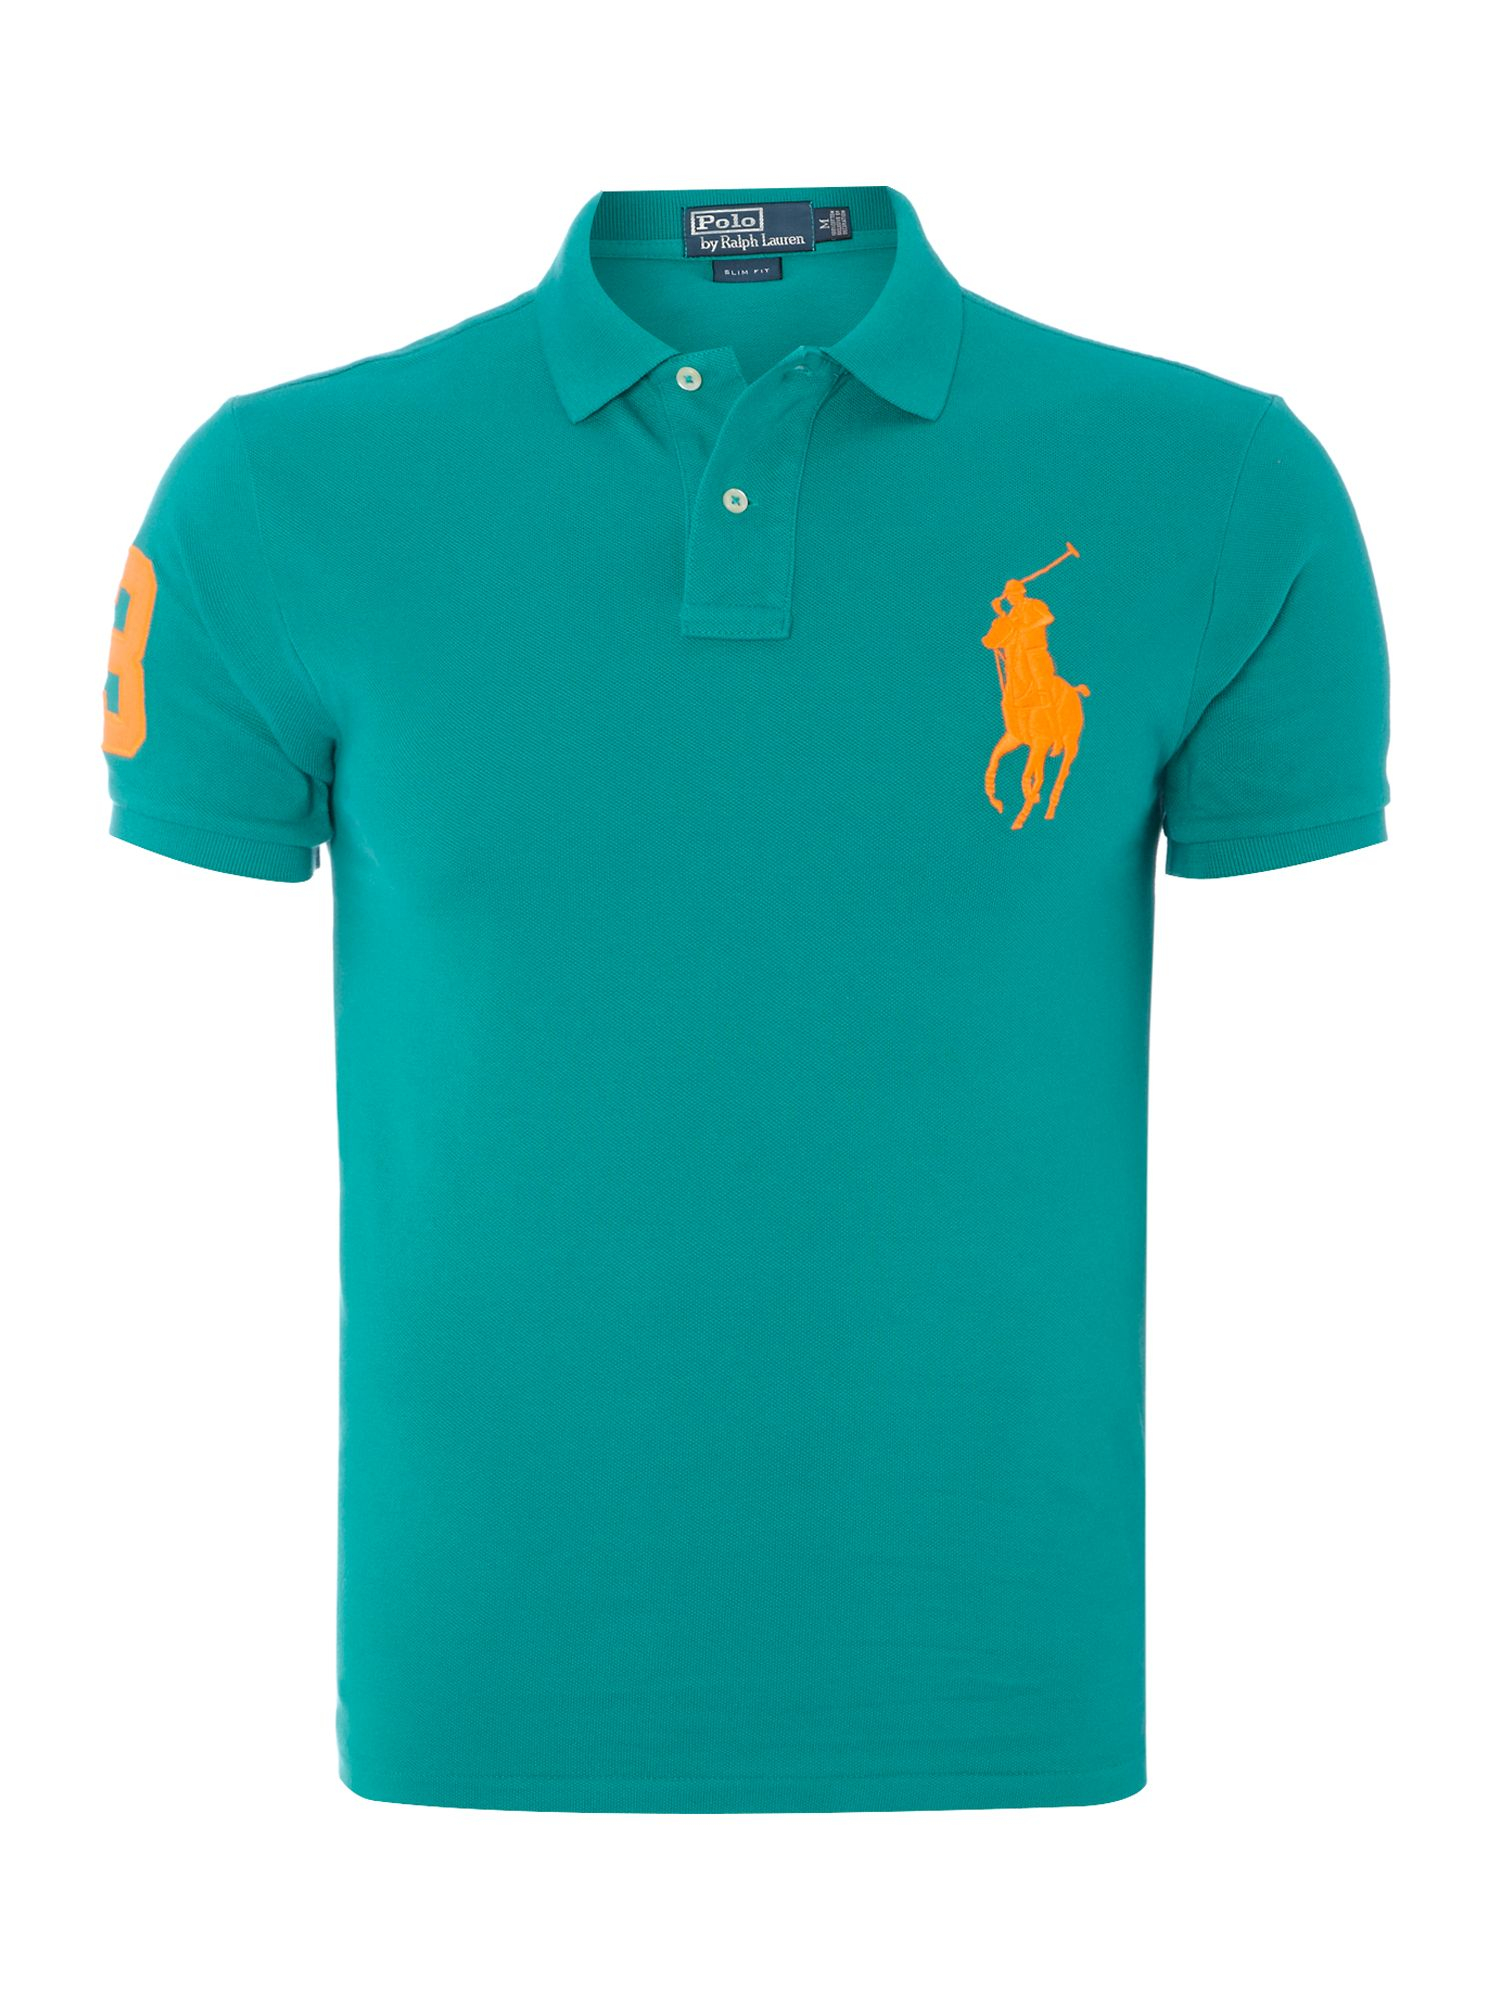 Polo ralph lauren Big Pony 3 Sleeve Slim Fit Polo Shirt in Green for ...